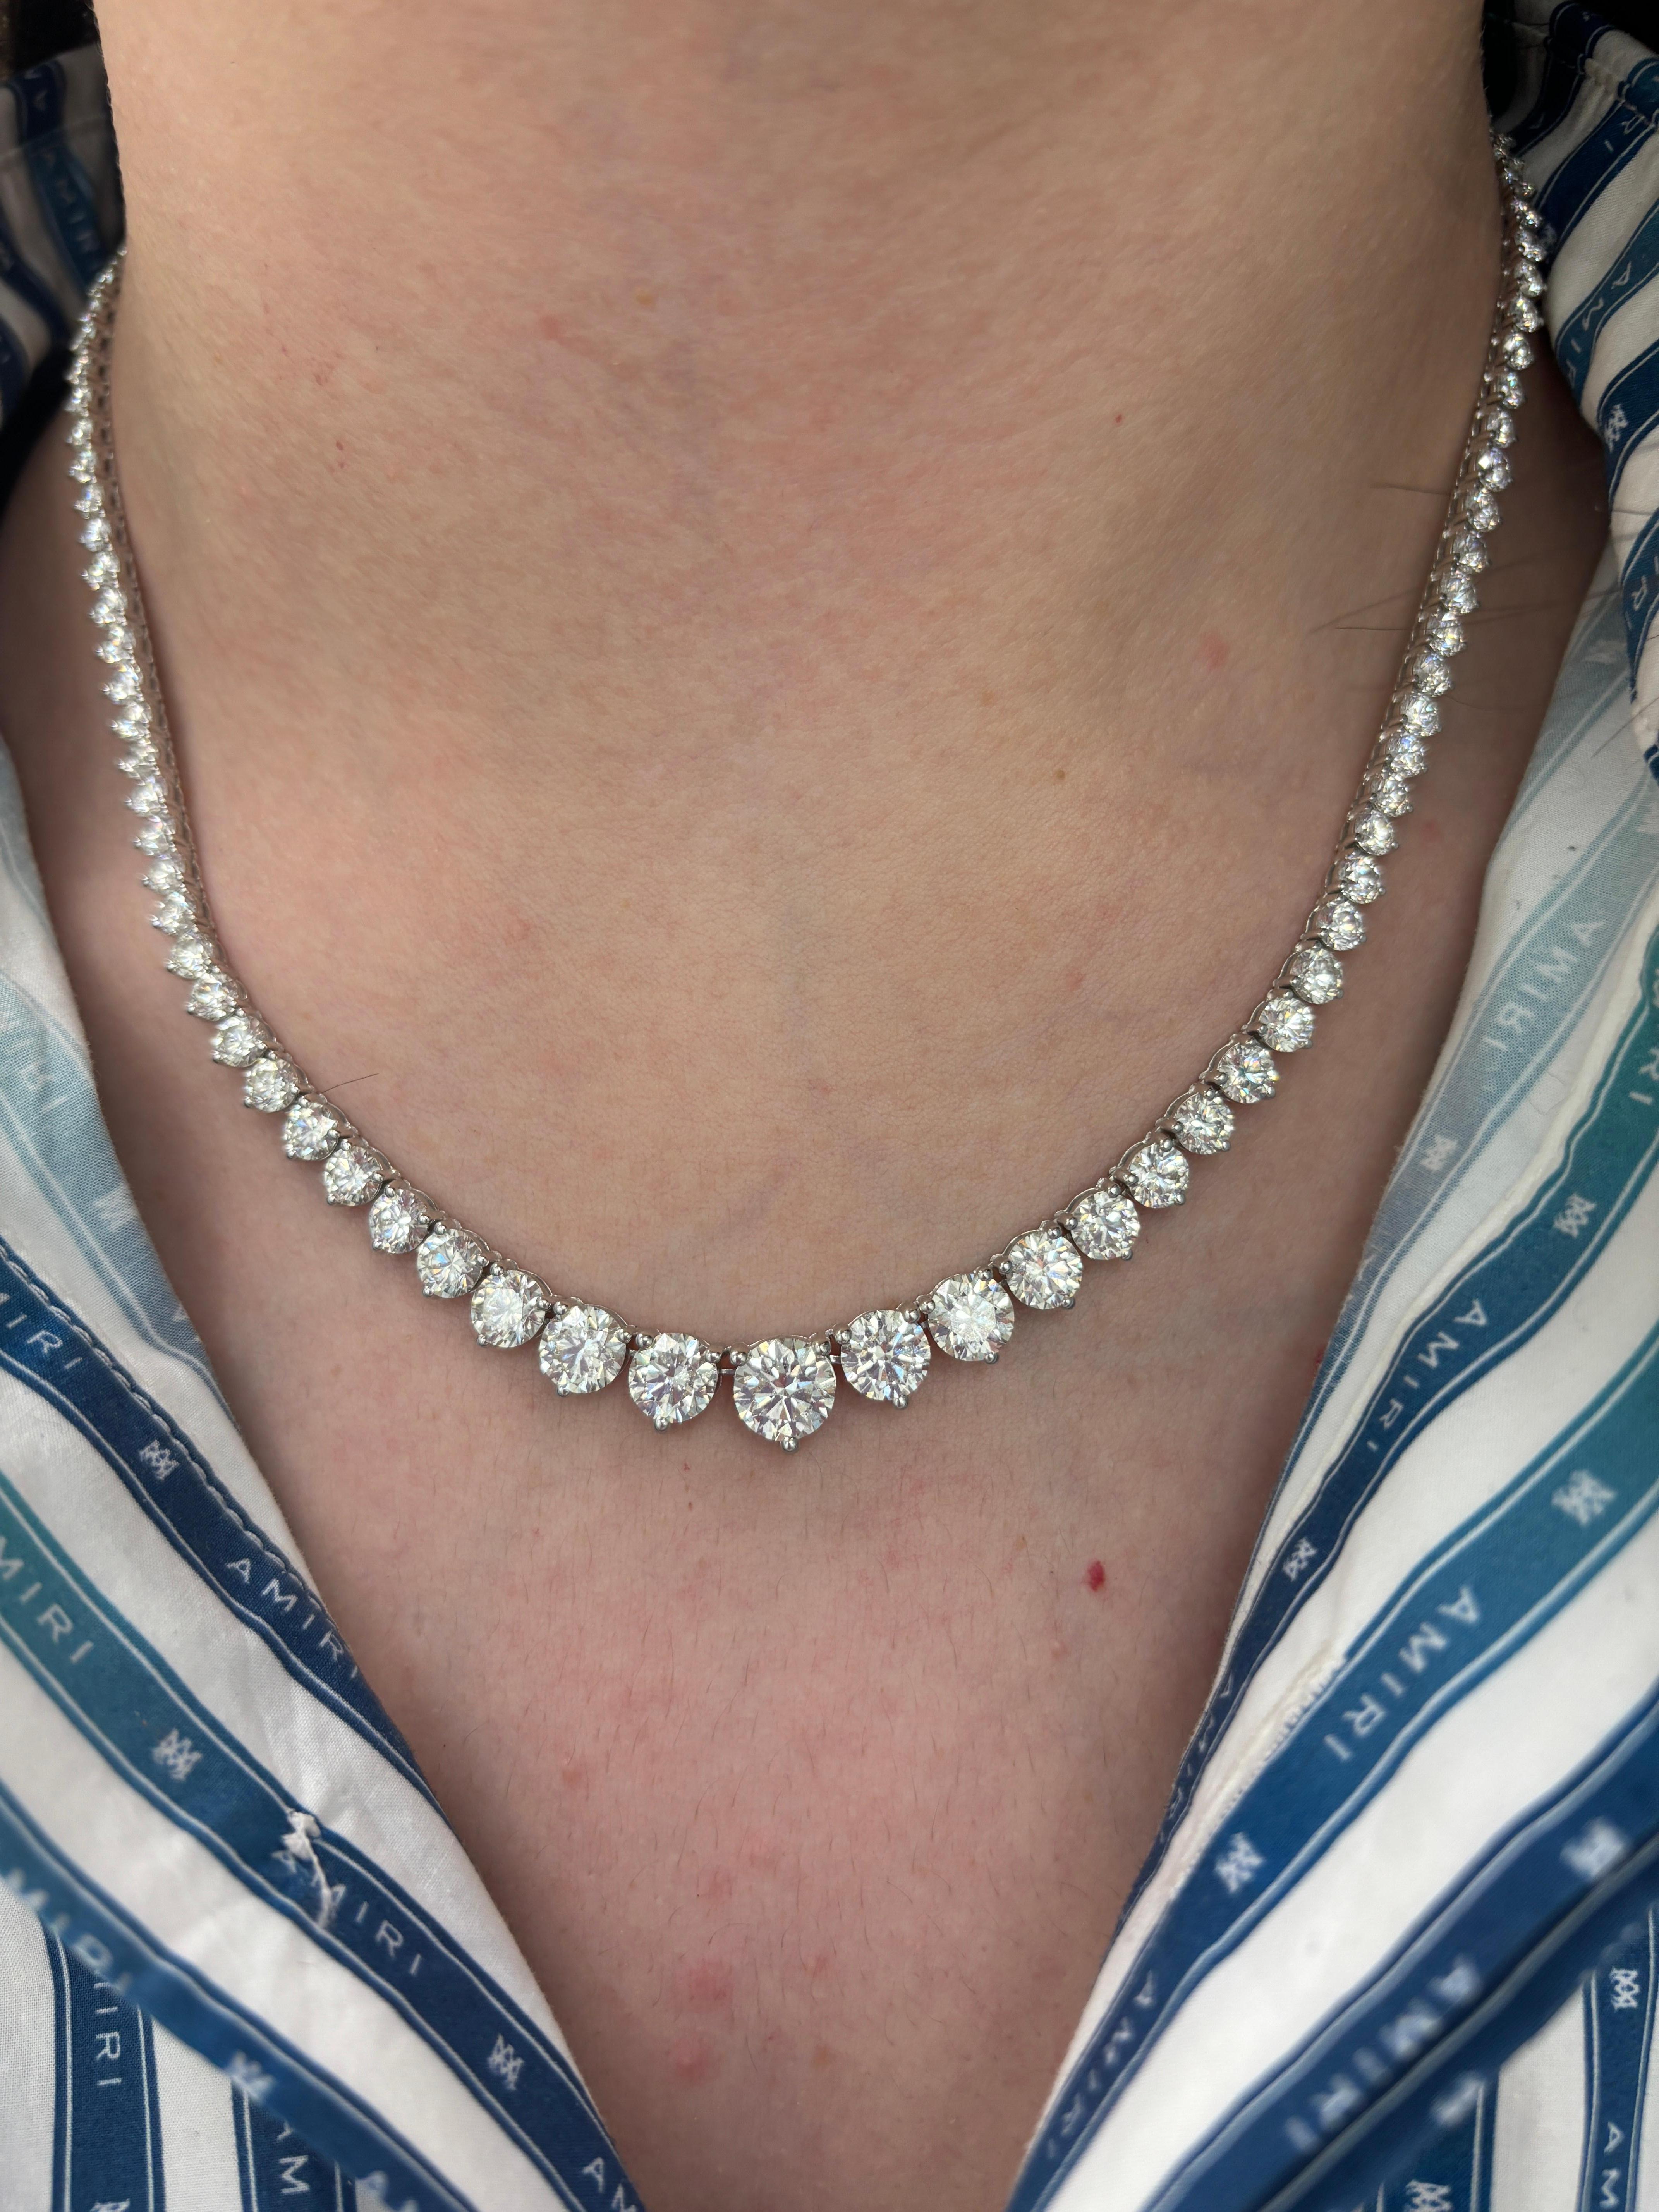 Beautiful and classic diamond tennis riviera necklace, GIA certified, by Alexander Beverly Hills.
114 round brilliant diamonds, 22.26 carats, 15 stones GIA certified. Approximately G-I color and VVS2-VS2 clarity. 18k white gold, 21.99 grams,